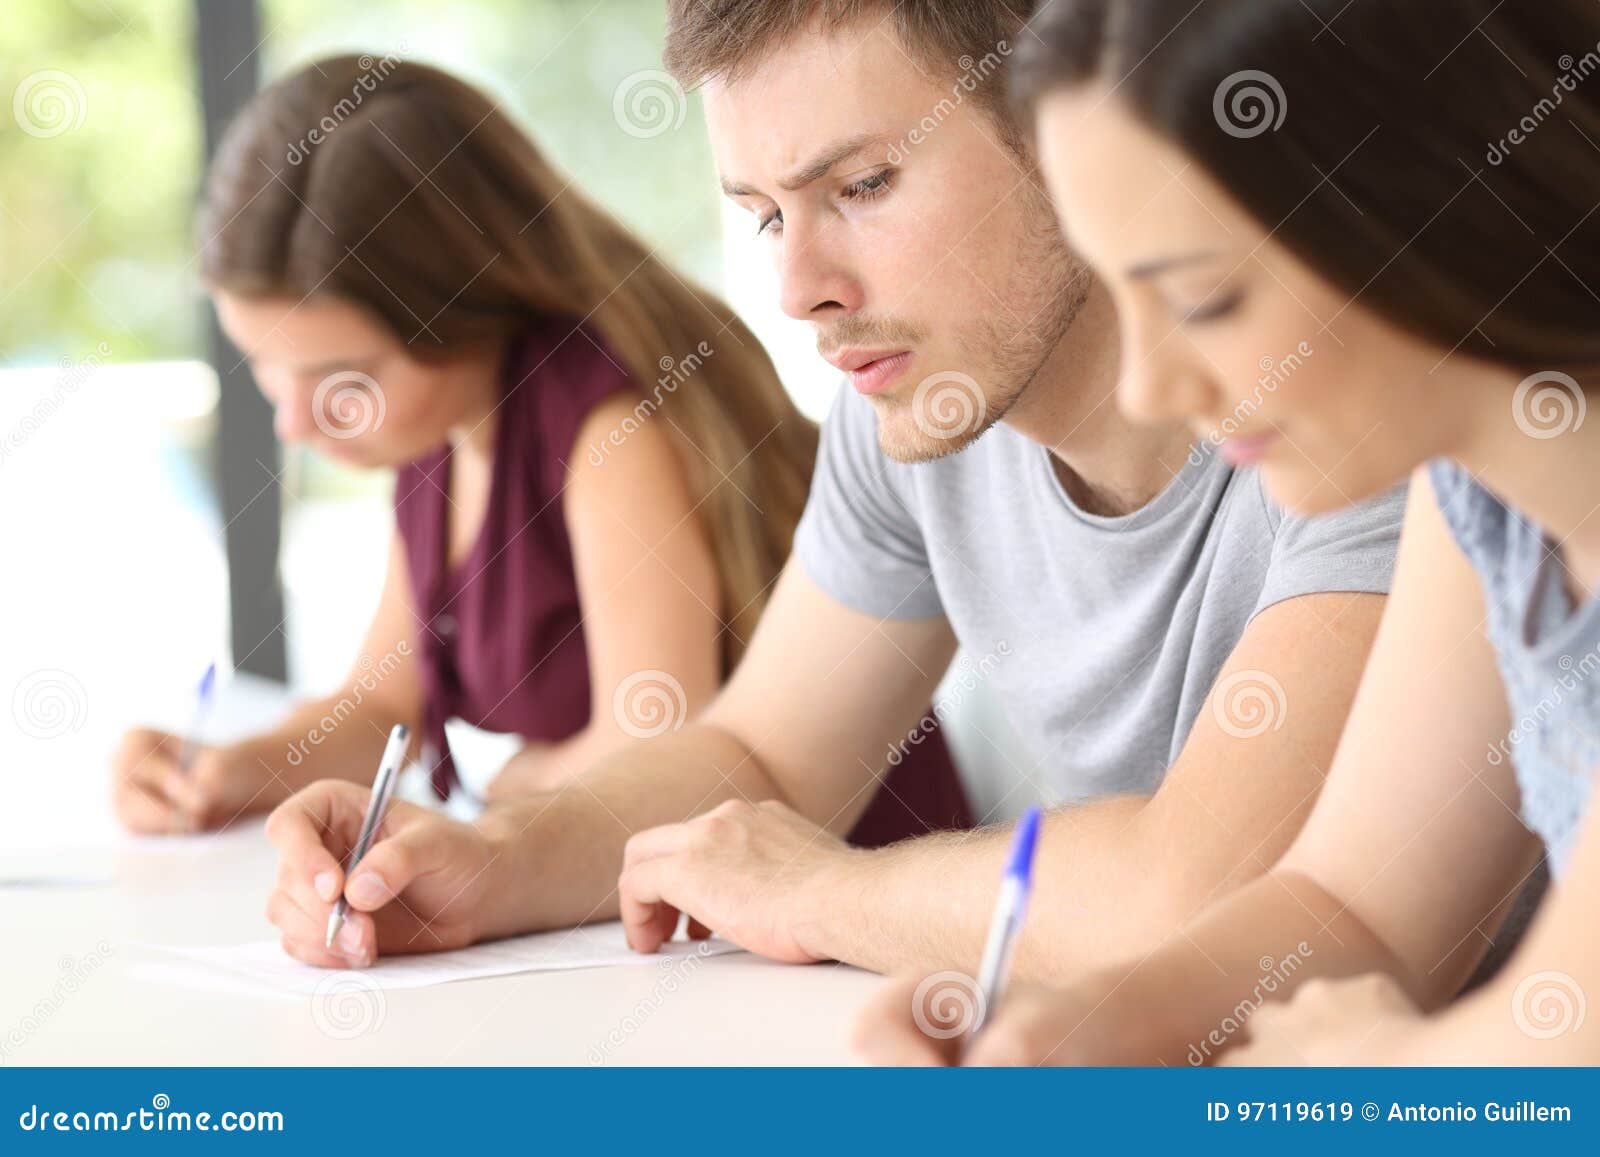 students copying assignments